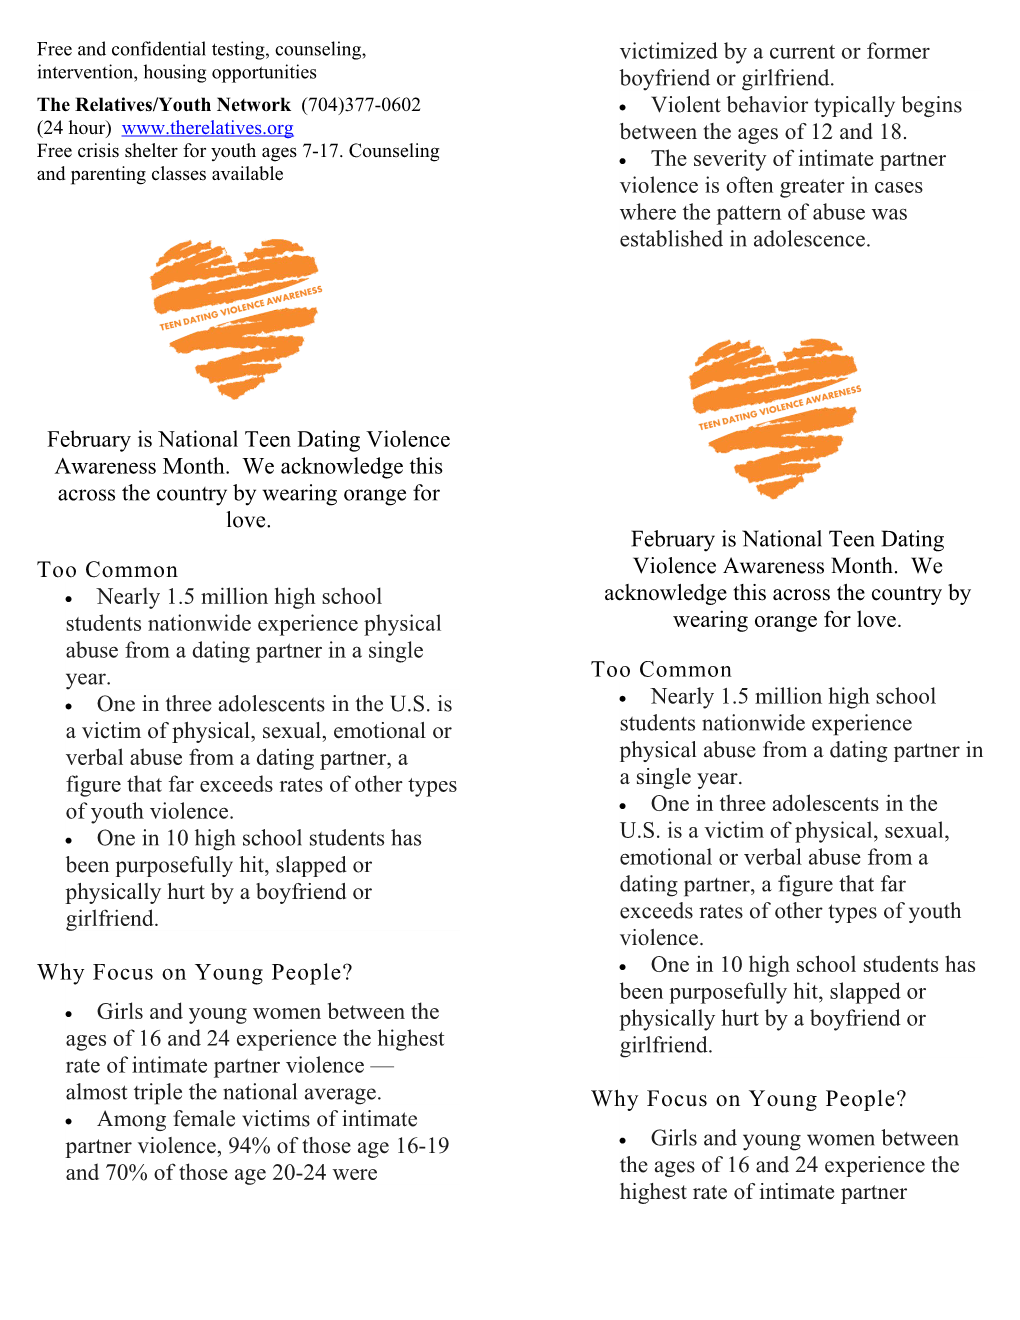 Teen Dating Violence Resources